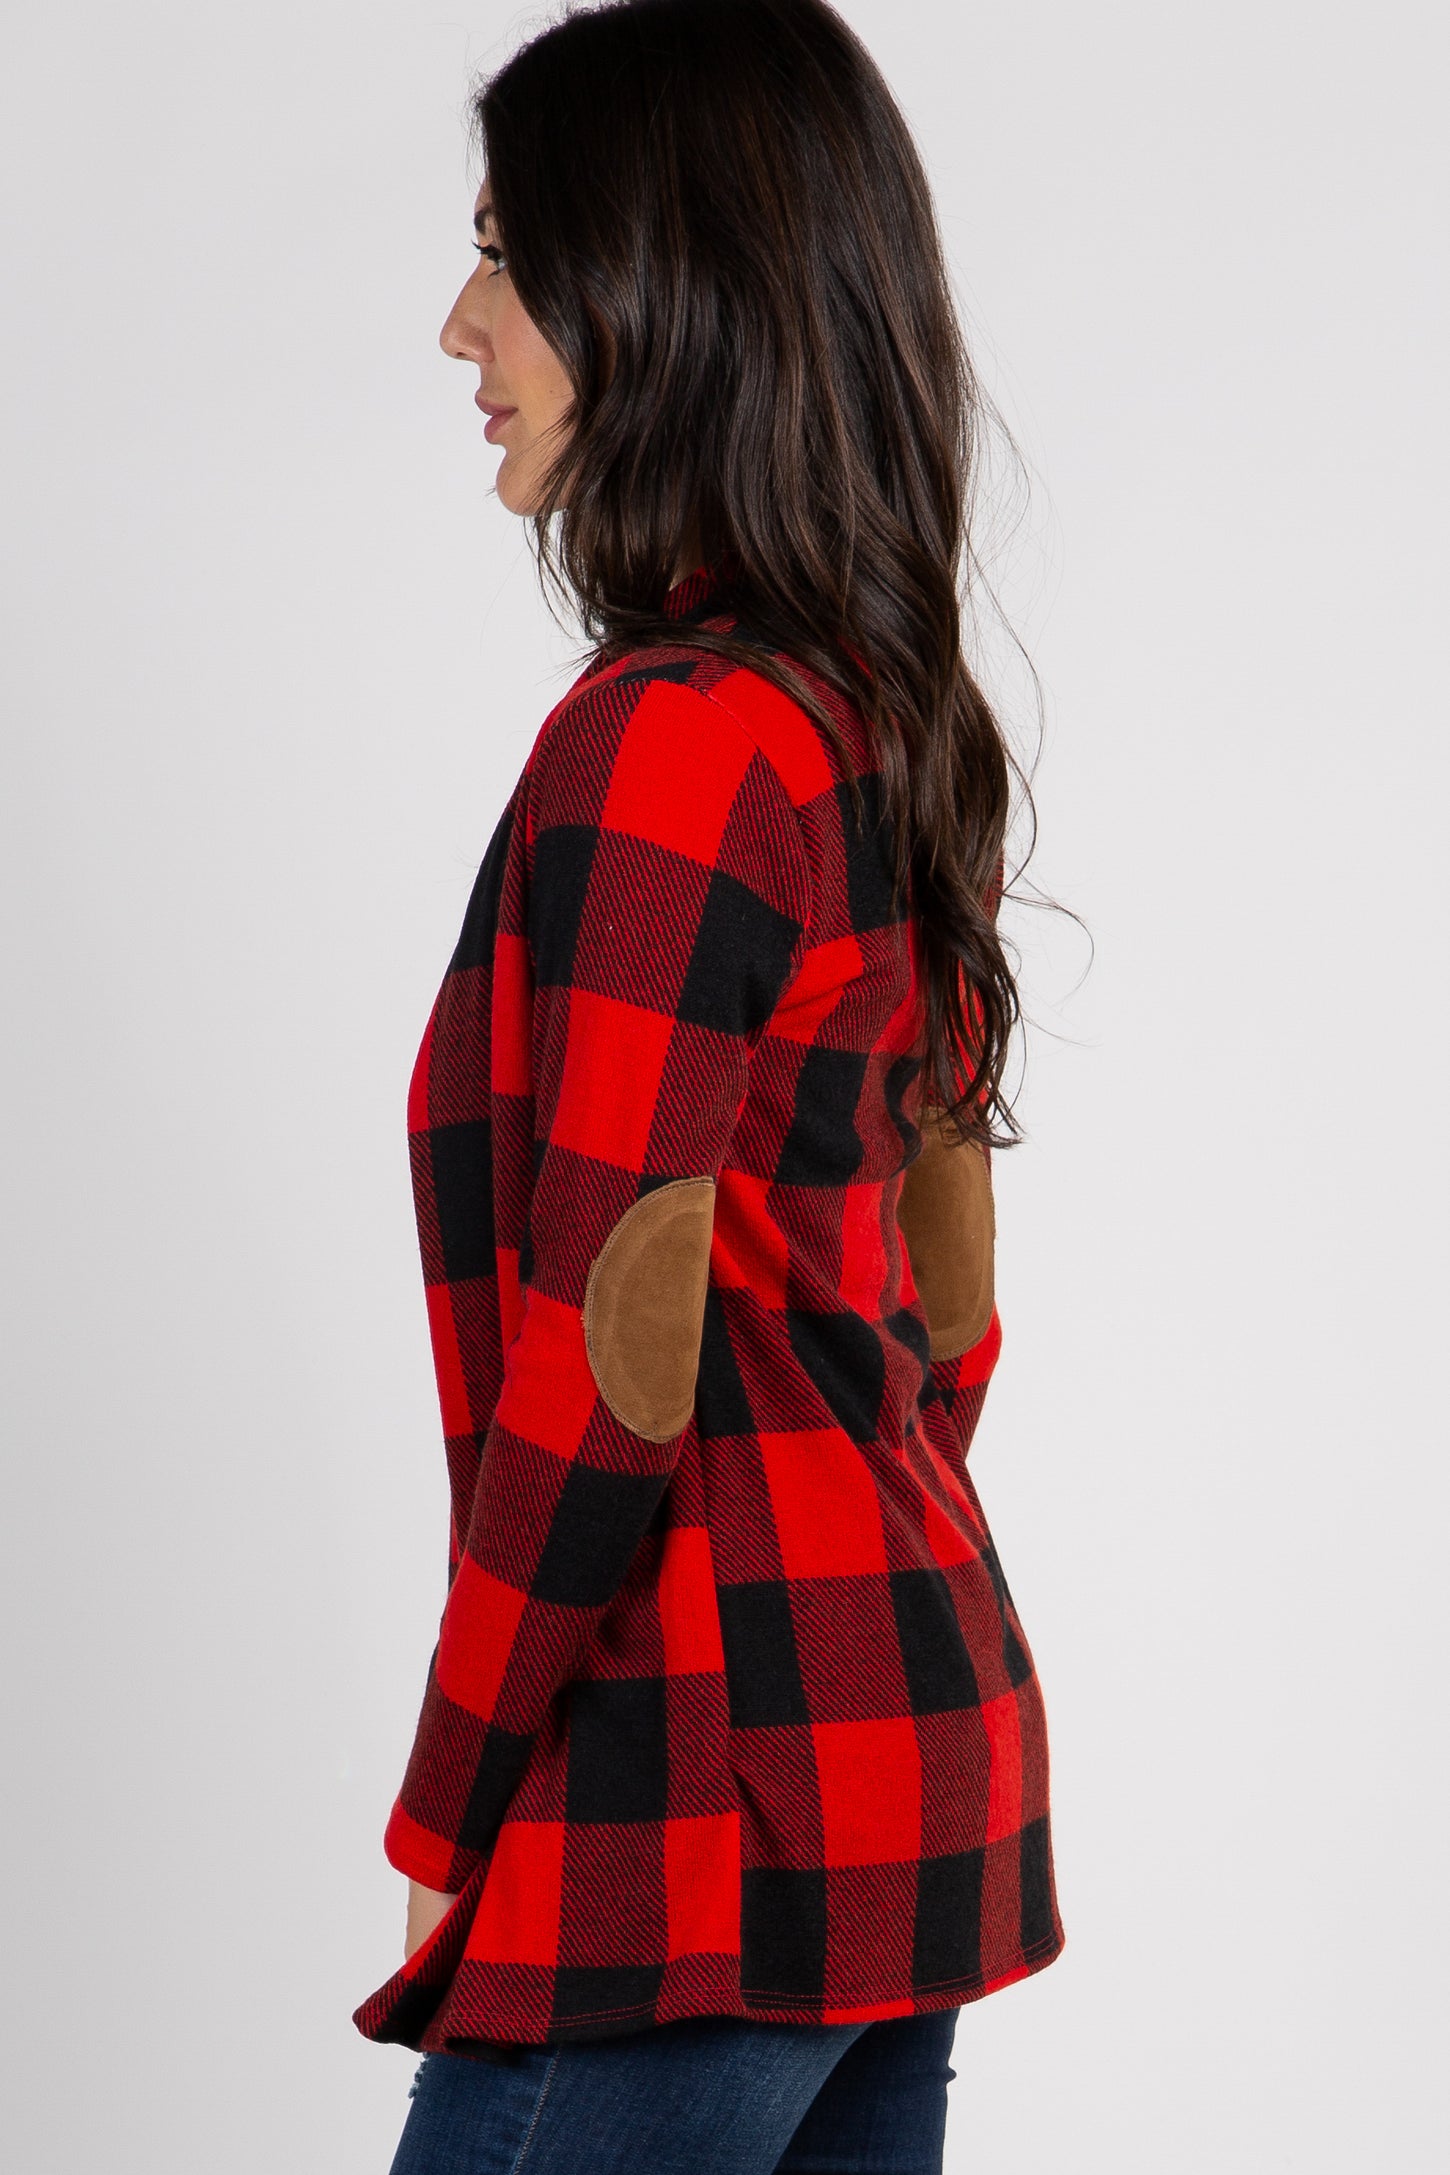 Red Plaid Suede Elbow Cardigan